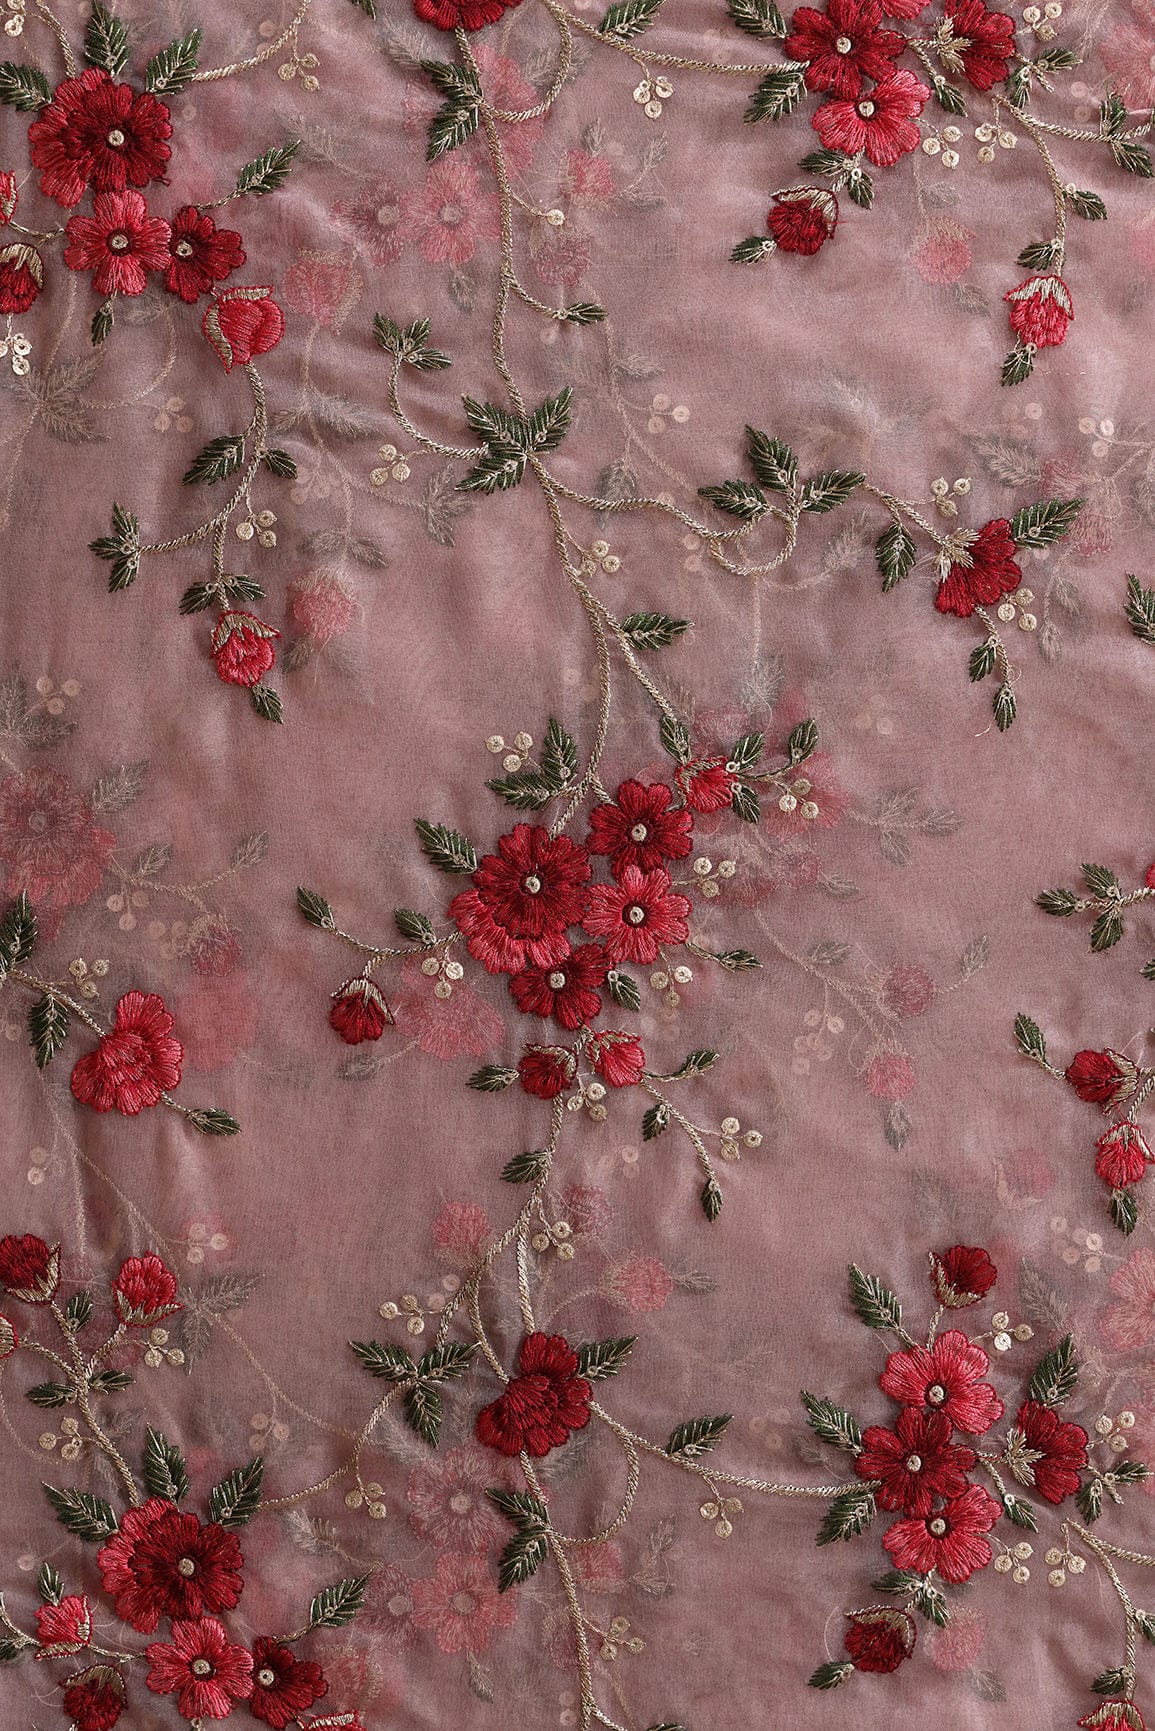 doeraa Embroidery Fabrics Multi Color Thread Floral Embroidery Work On Salmon Pink Organza Fabric